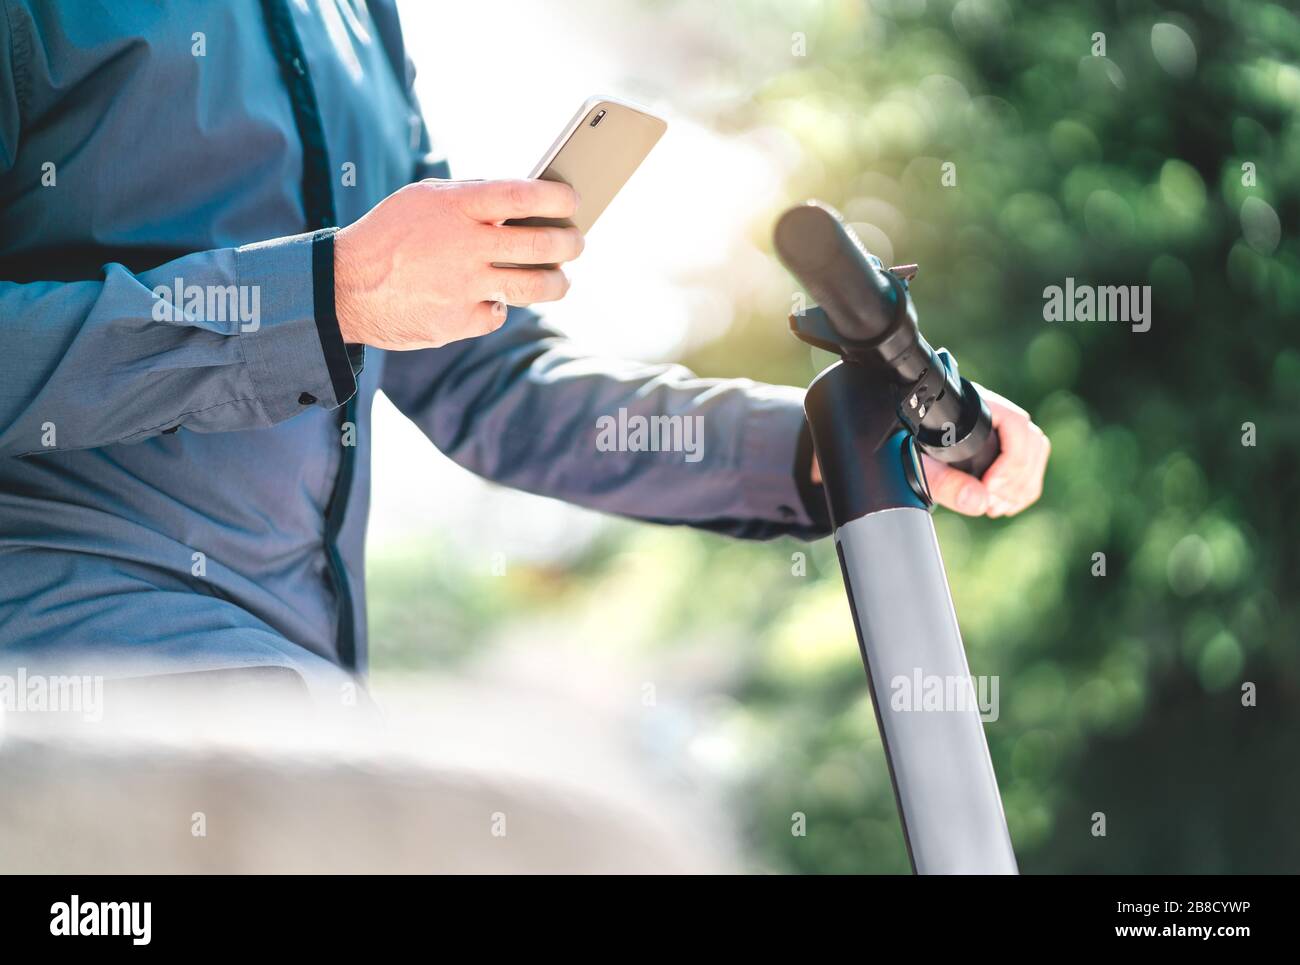 Businessman renting electric kick scooter with smartphone in city park. Hipster man using smart mobile phone rental service in urban street. E vehicle. Stock Photo